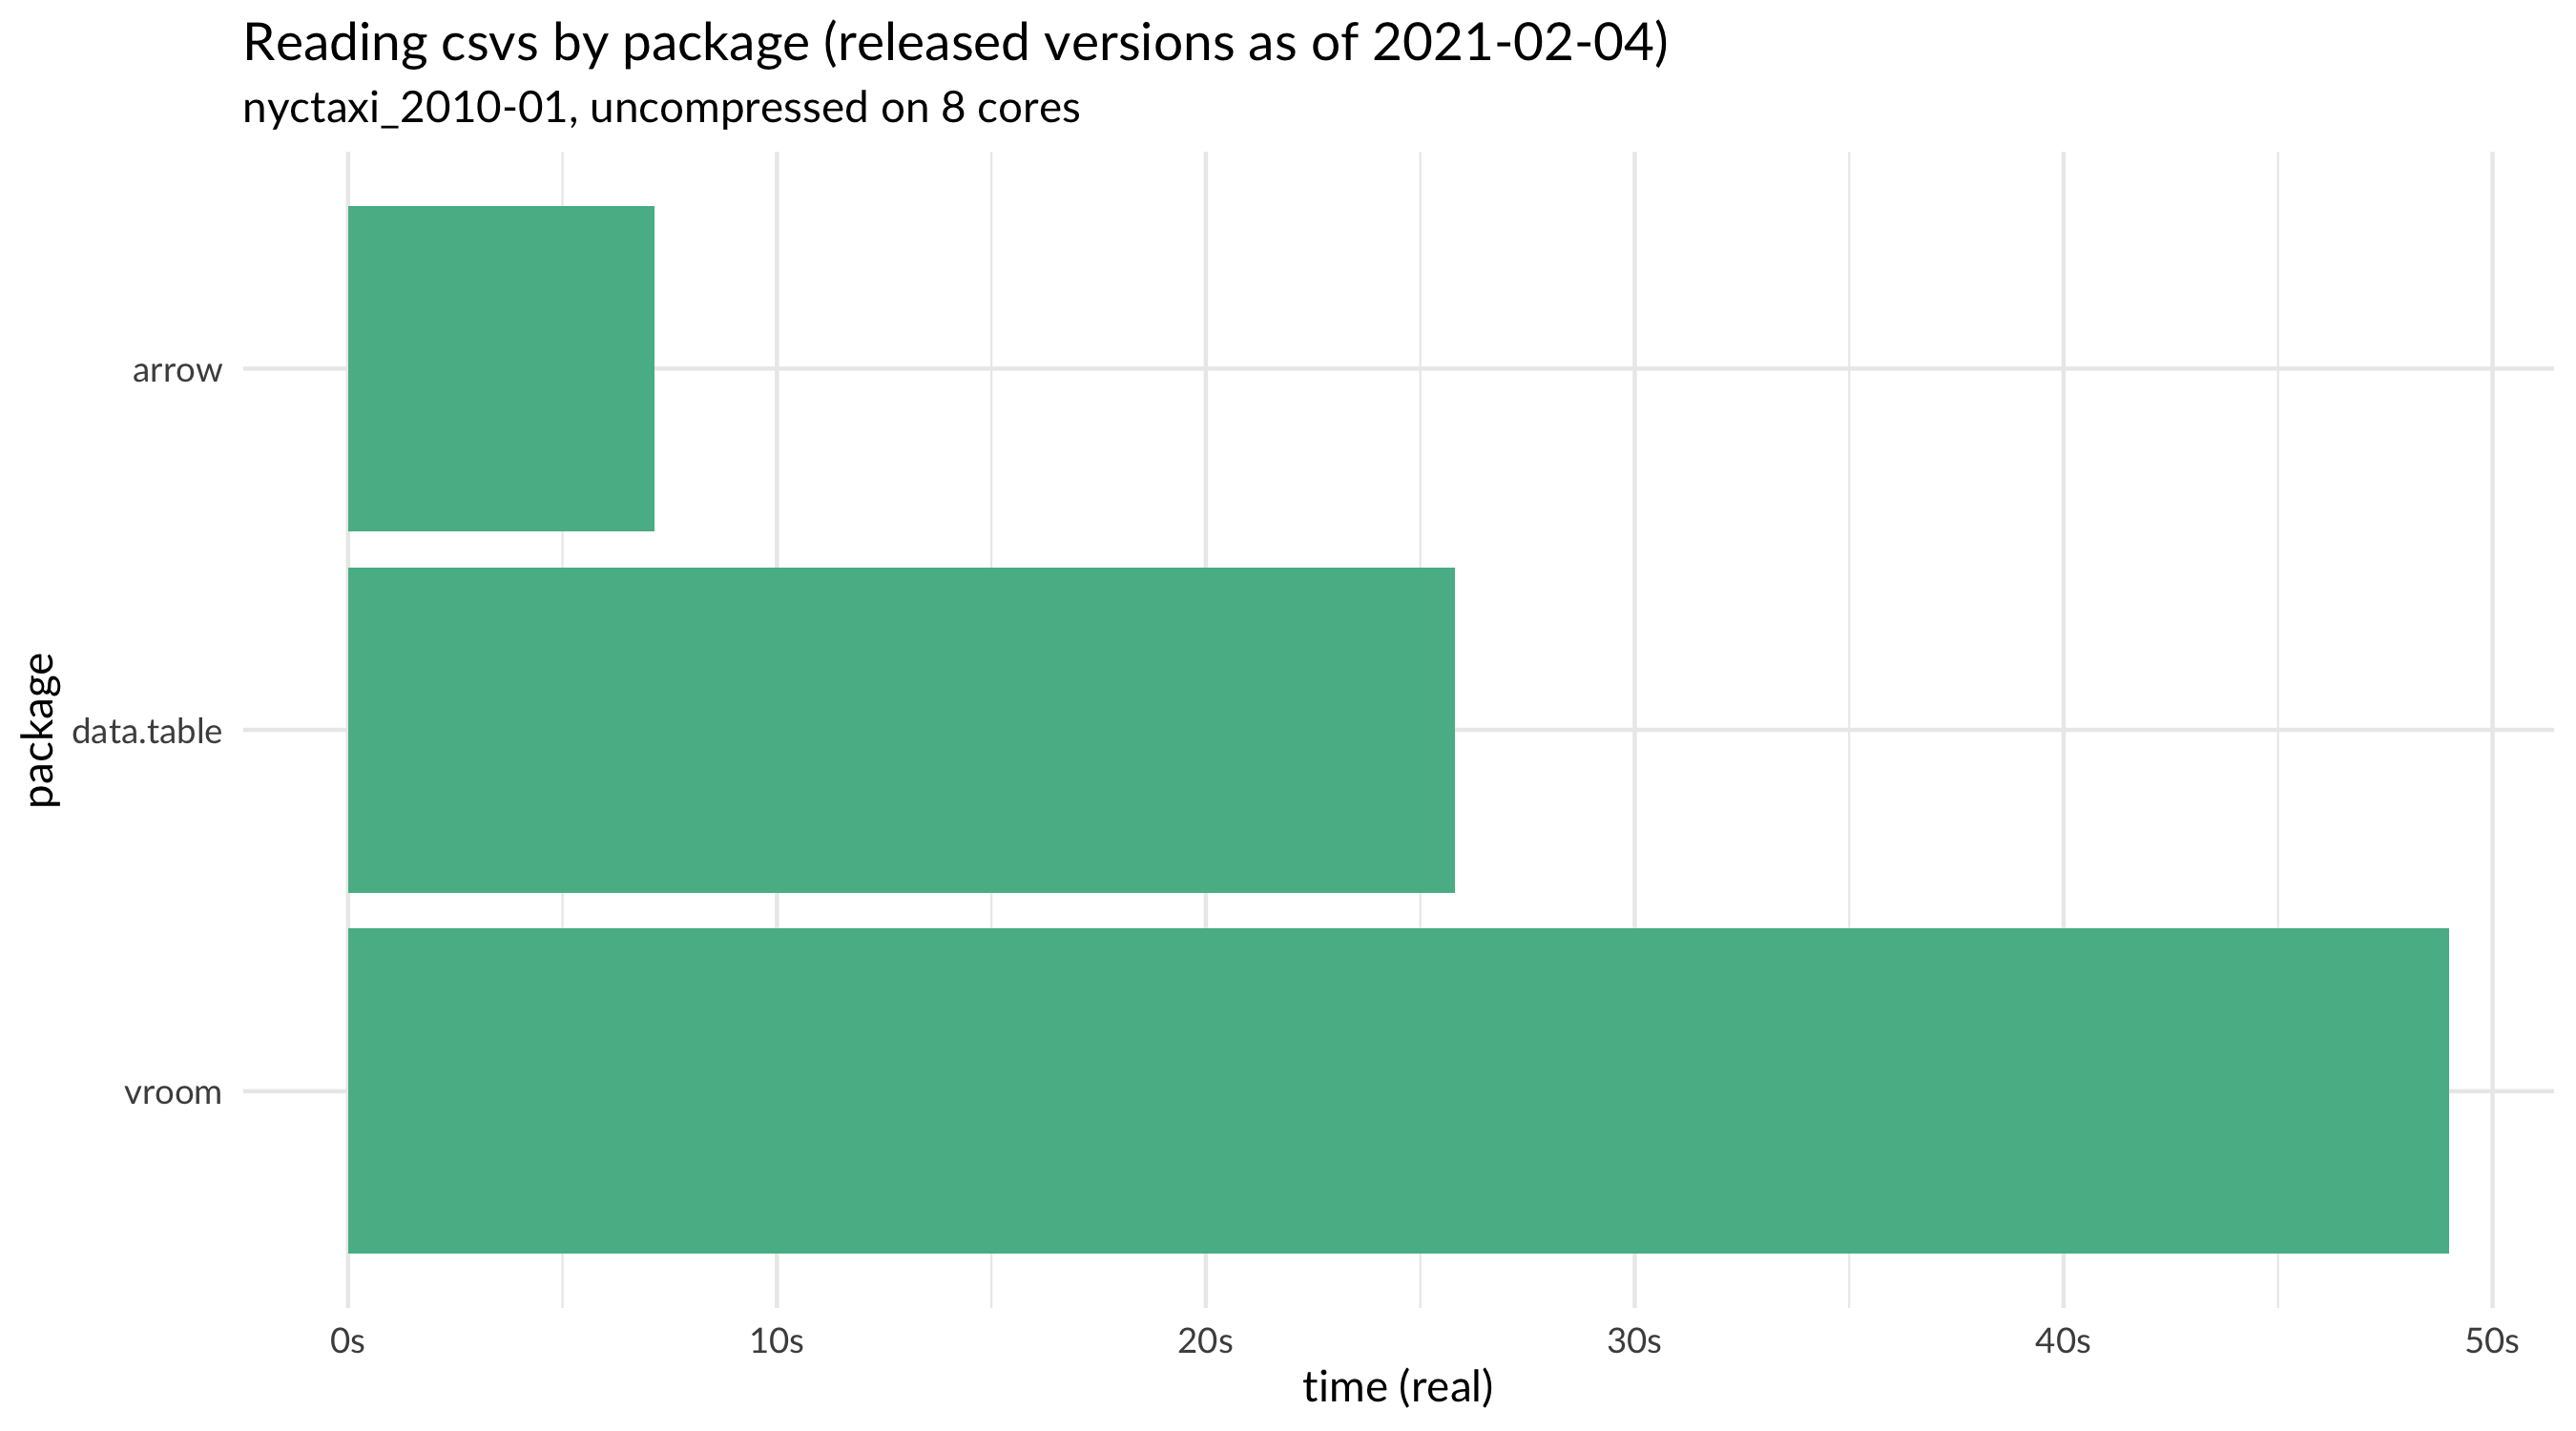 A bar chart of time it takes to read a csv into R for release versions of the packages Arrow, data.table, and vroom. The versions are released versions as of 2021-02-04, for the uncompressed nyctaxi_2010-01 dataset with 8 cores. Arrow is fastest, data.table second fastest, and vroom the slowest.